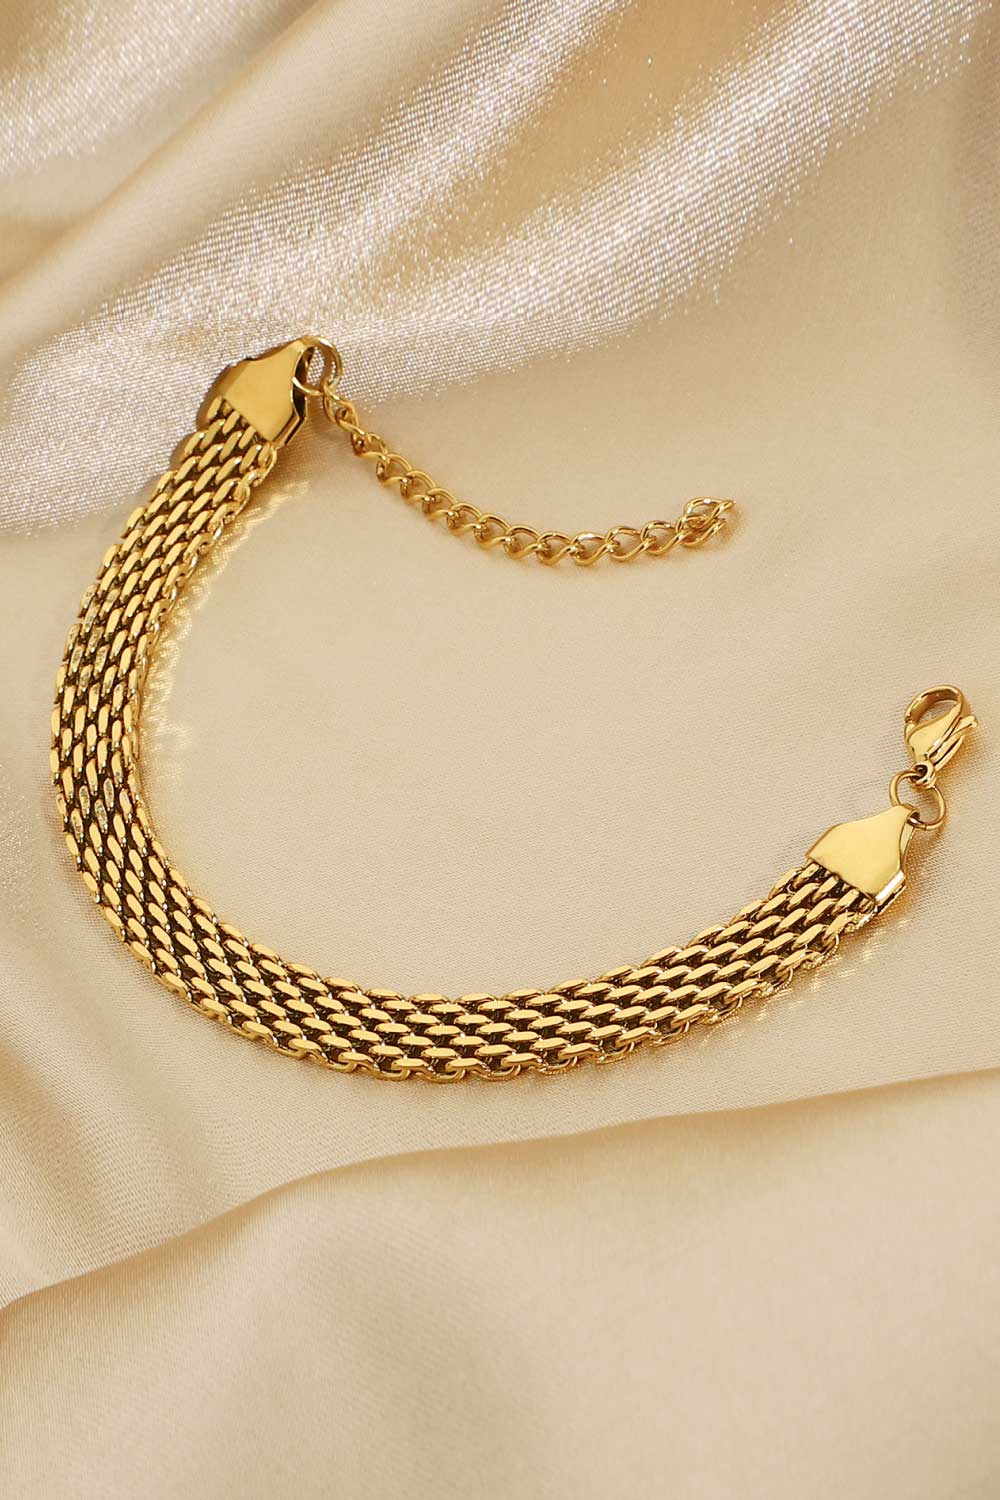 18K Gold-Plated Wide Chain Bracelet - PINKCOLADA--100100492017124